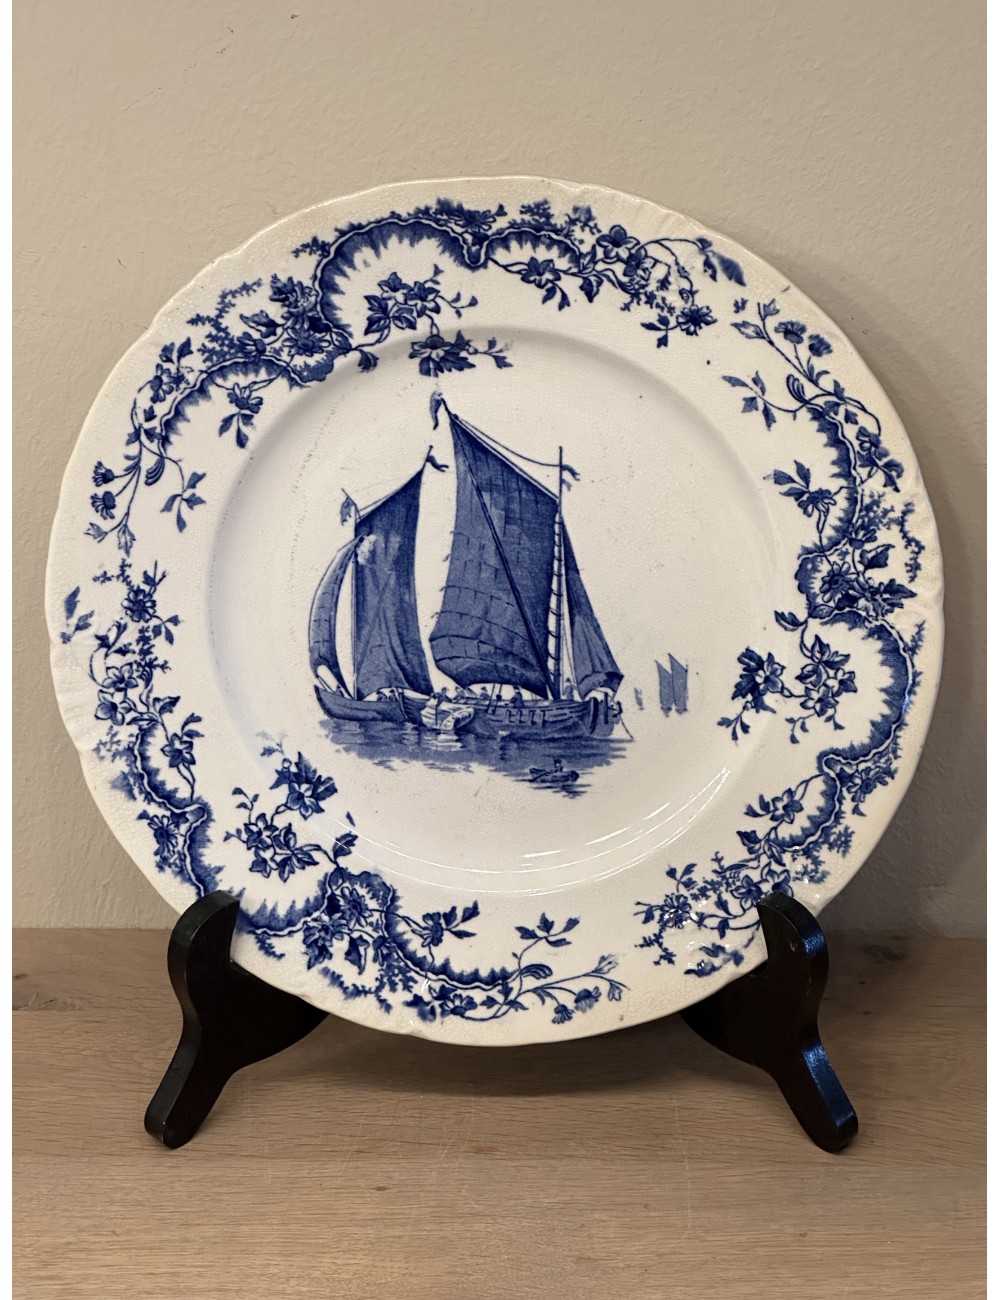 Dinner plate / Dinner plate - Stoke on Trent, England - décor executed in blue with a 2x a sailboat